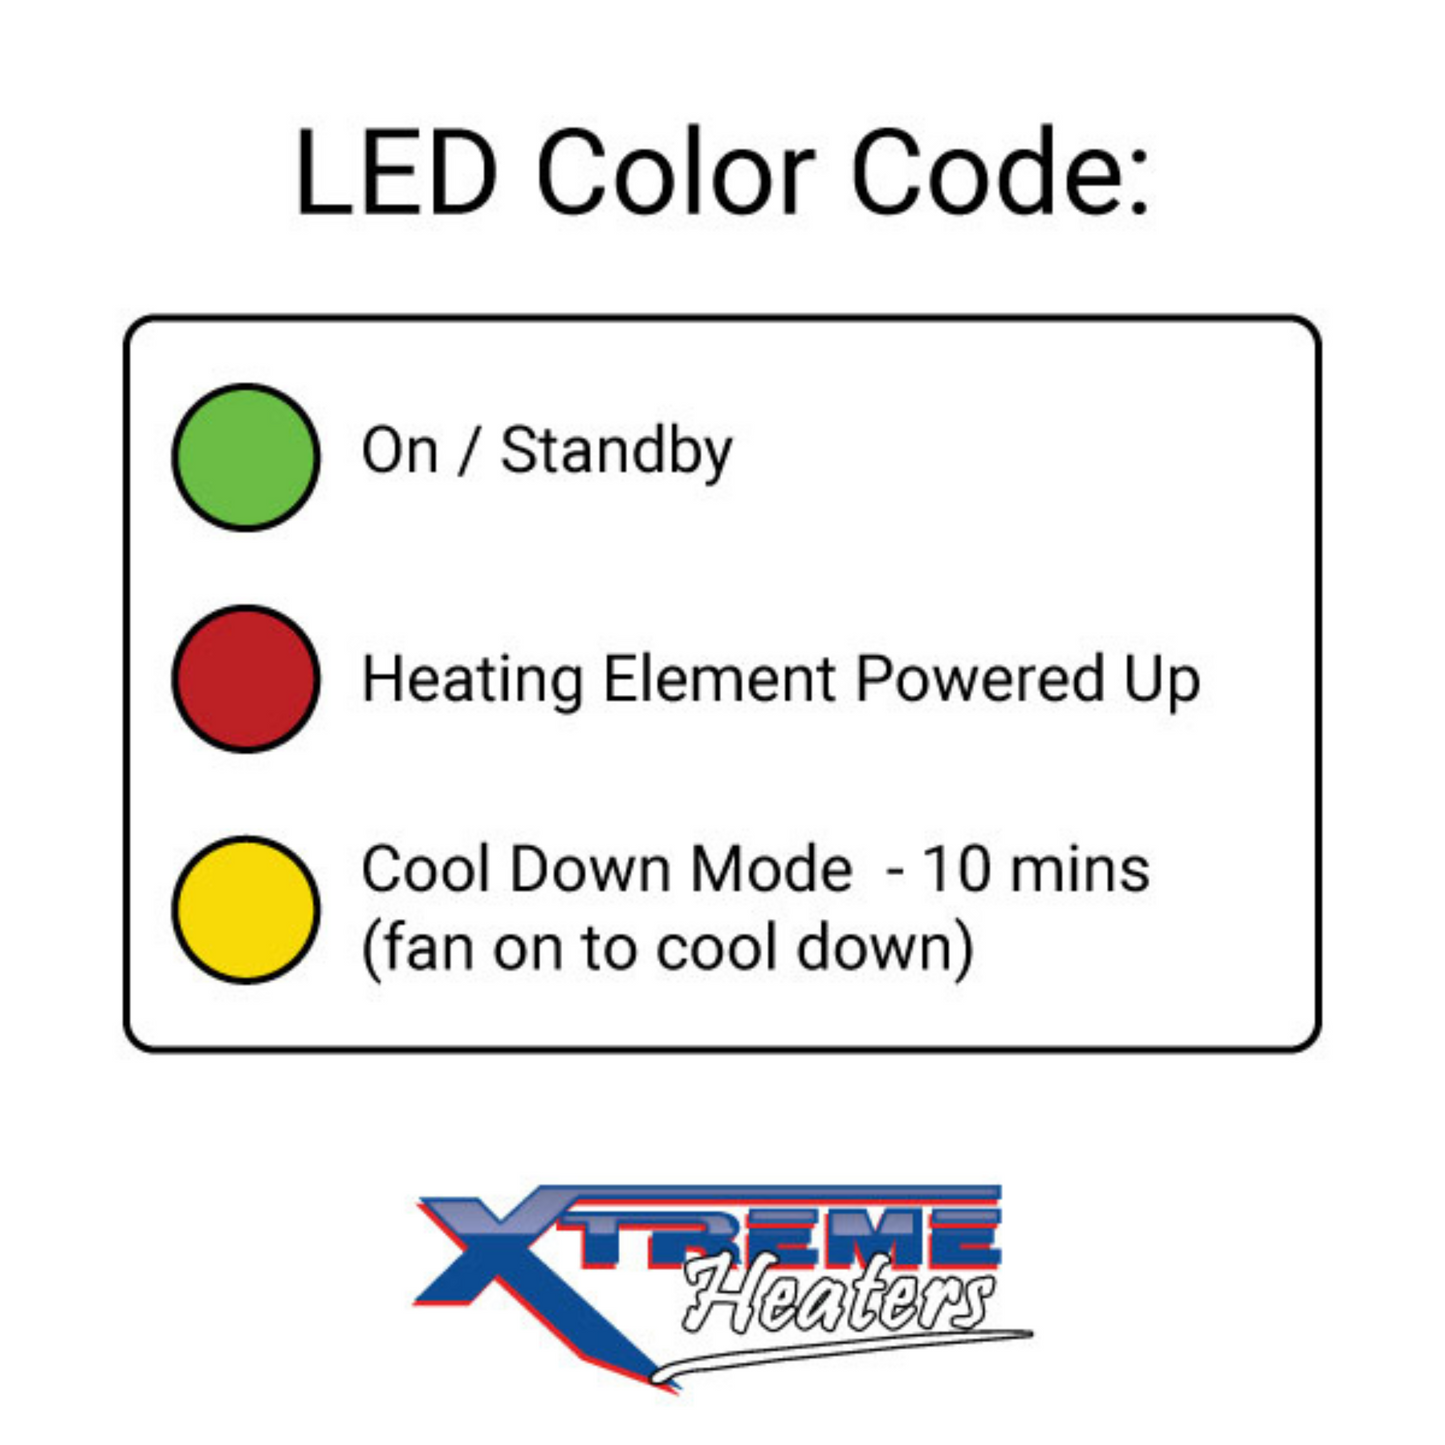 LED Color Codes for Xtreme Heaters